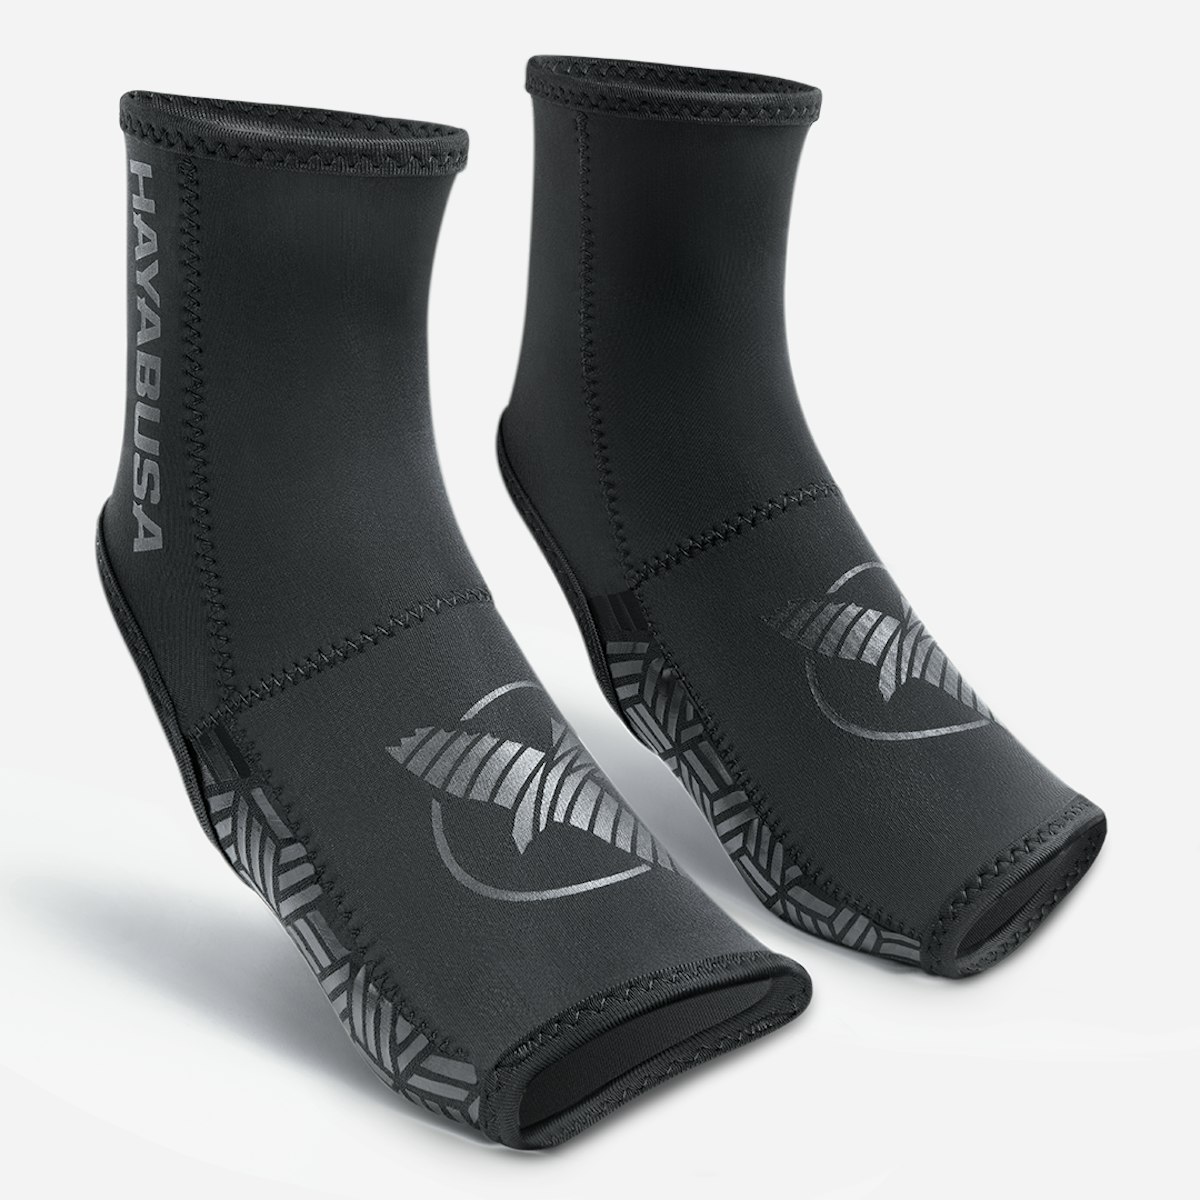 Best Grappling Socks 2021 Guide And Reviews - BJJ World